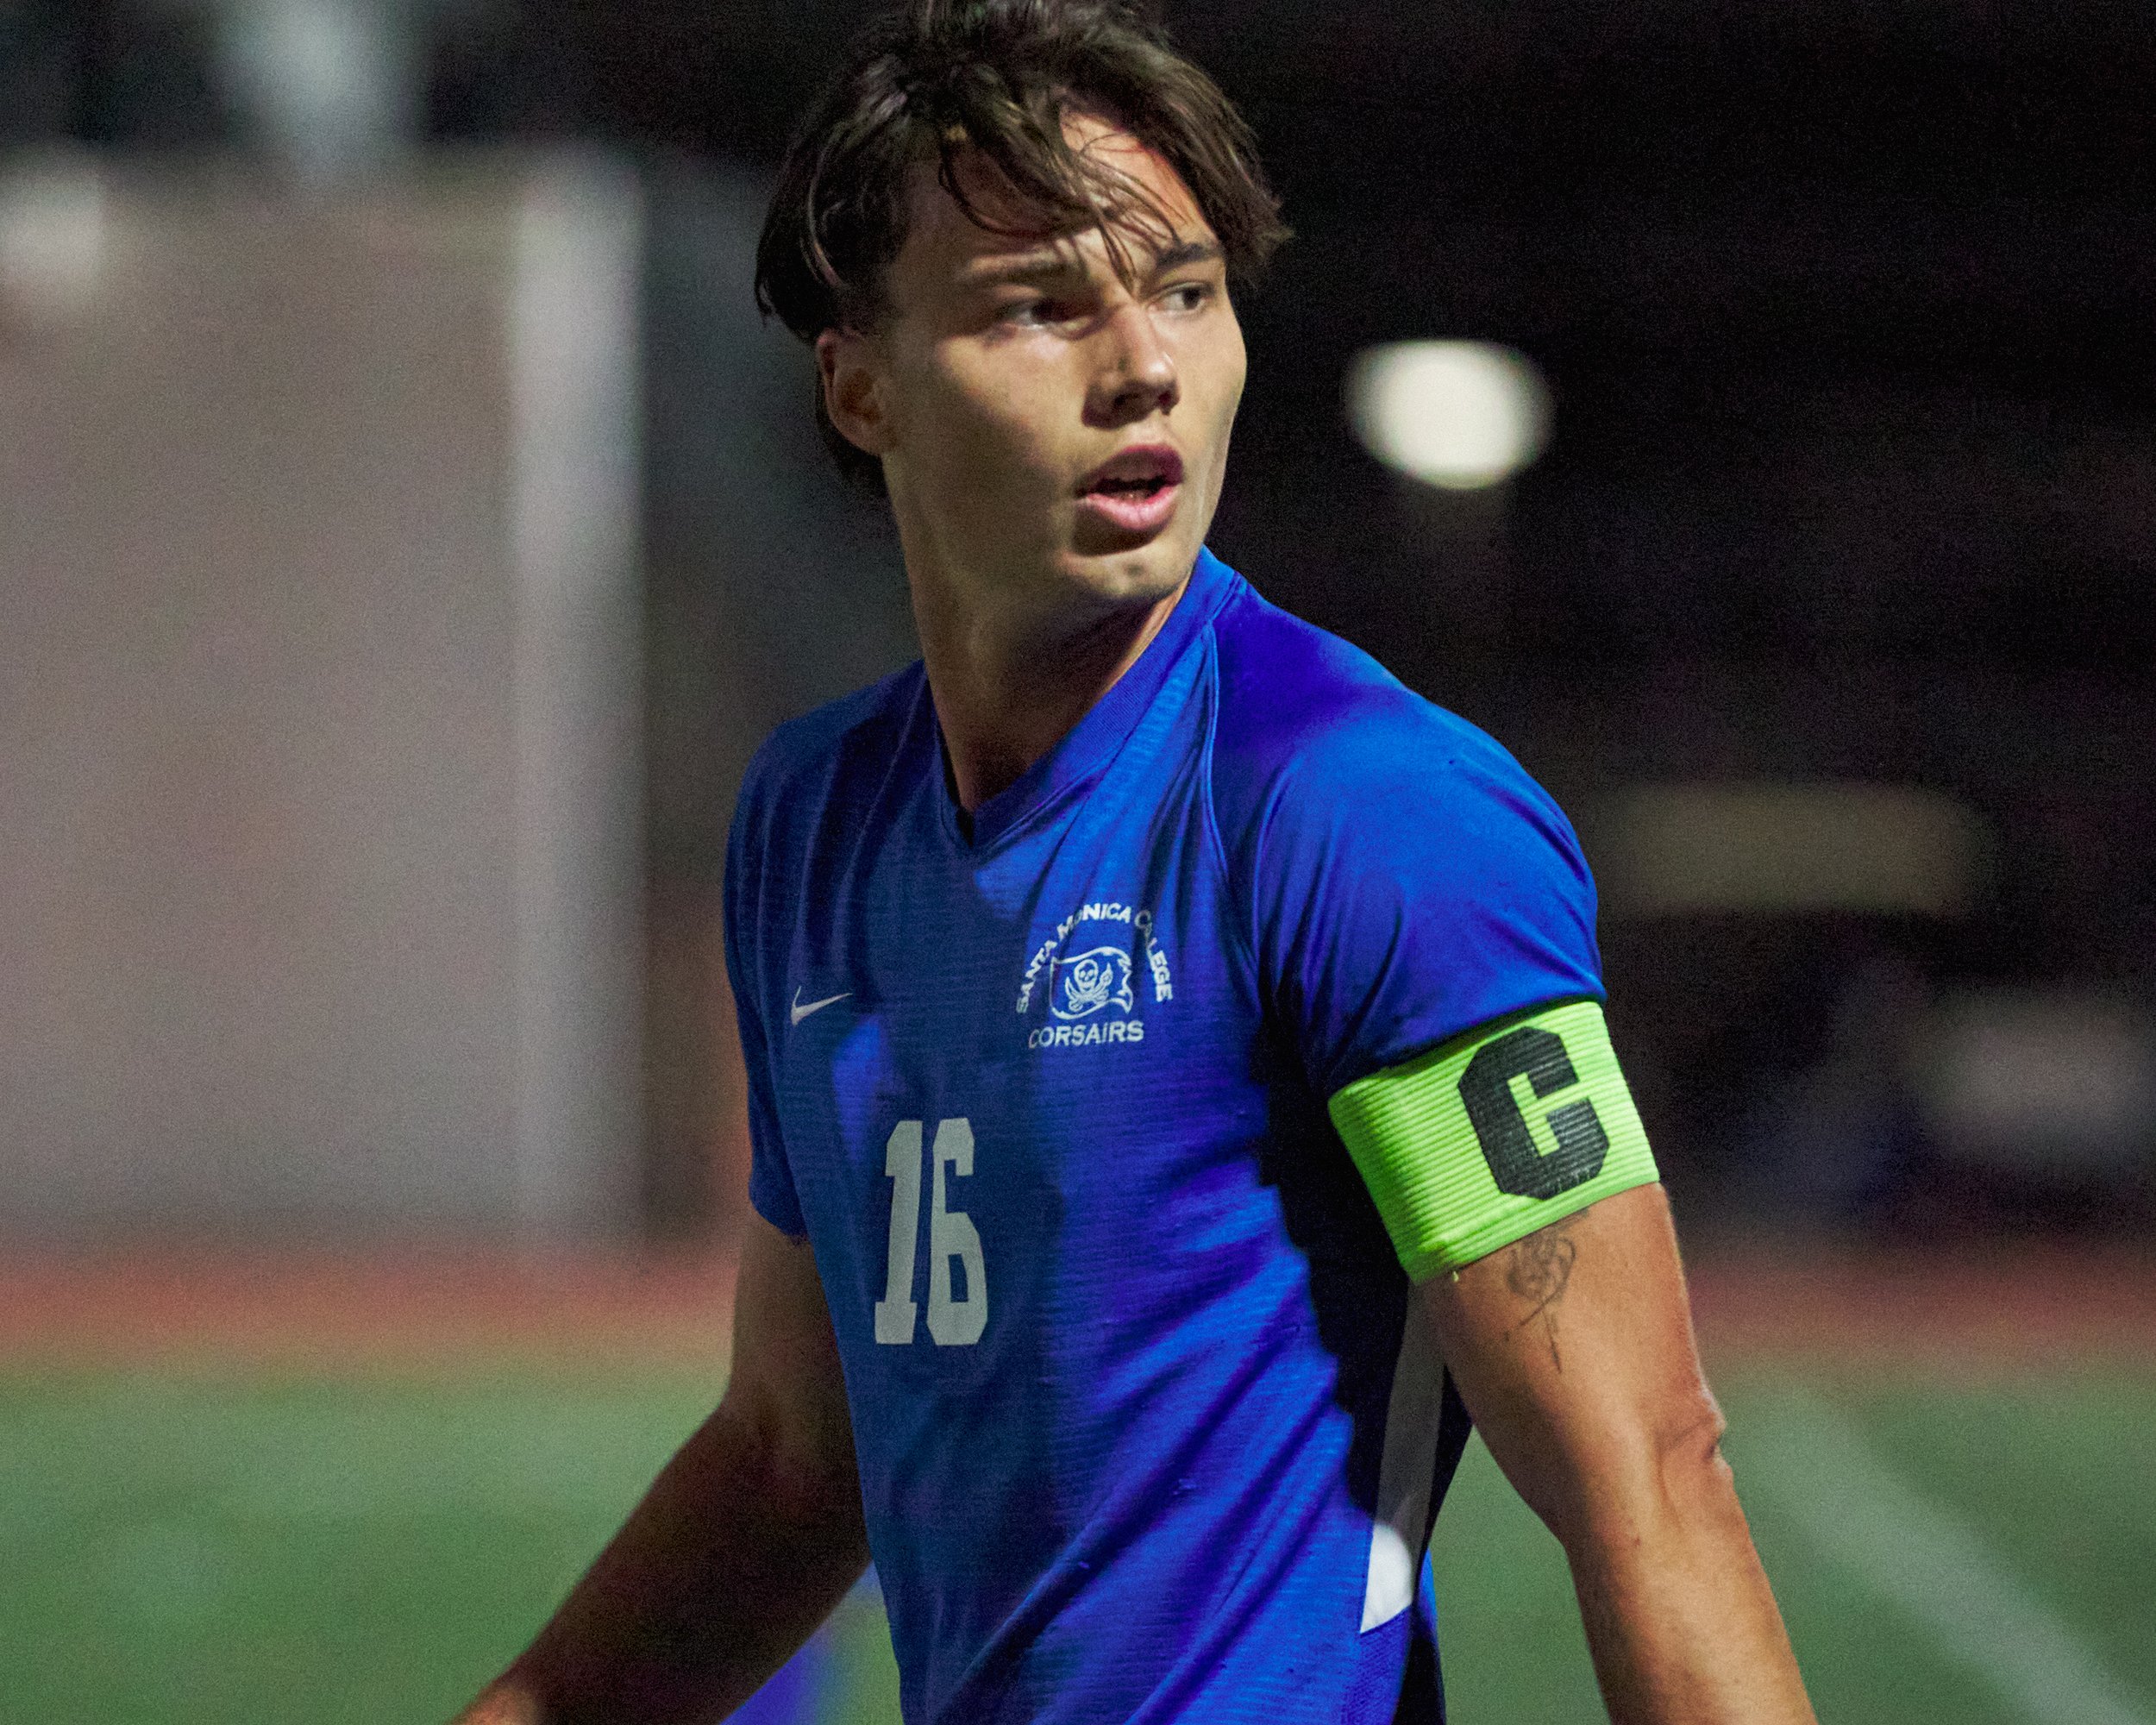  Santa Monica College Corsairs' Kyler Sorber during the men's soccer match against the Norco College Mustangs on Saturday, Nov. 19, 2022, at Corsair Field in Santa Monica, Calif. (Nicholas McCall | The Corsair) 